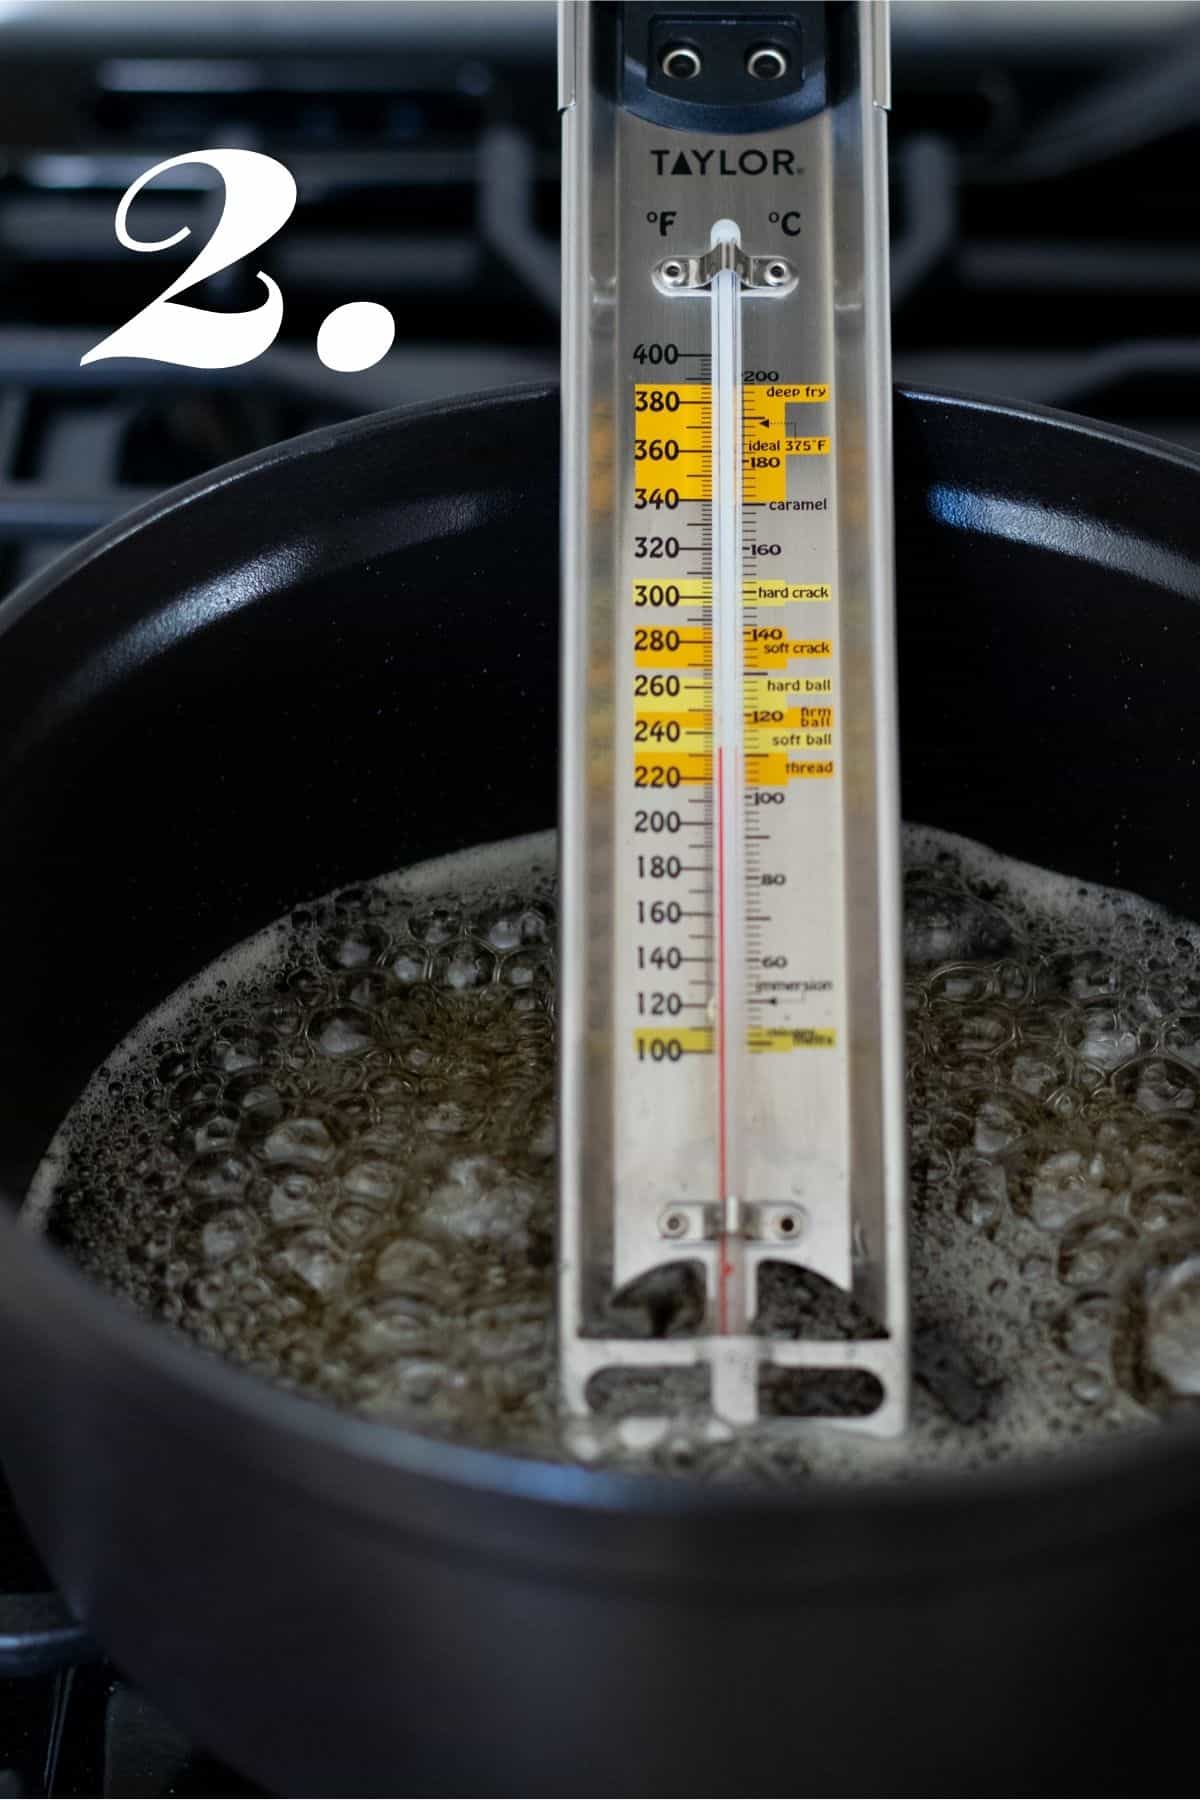 Sugar boiling on stove with candy thermometer reading temperature of sugar.